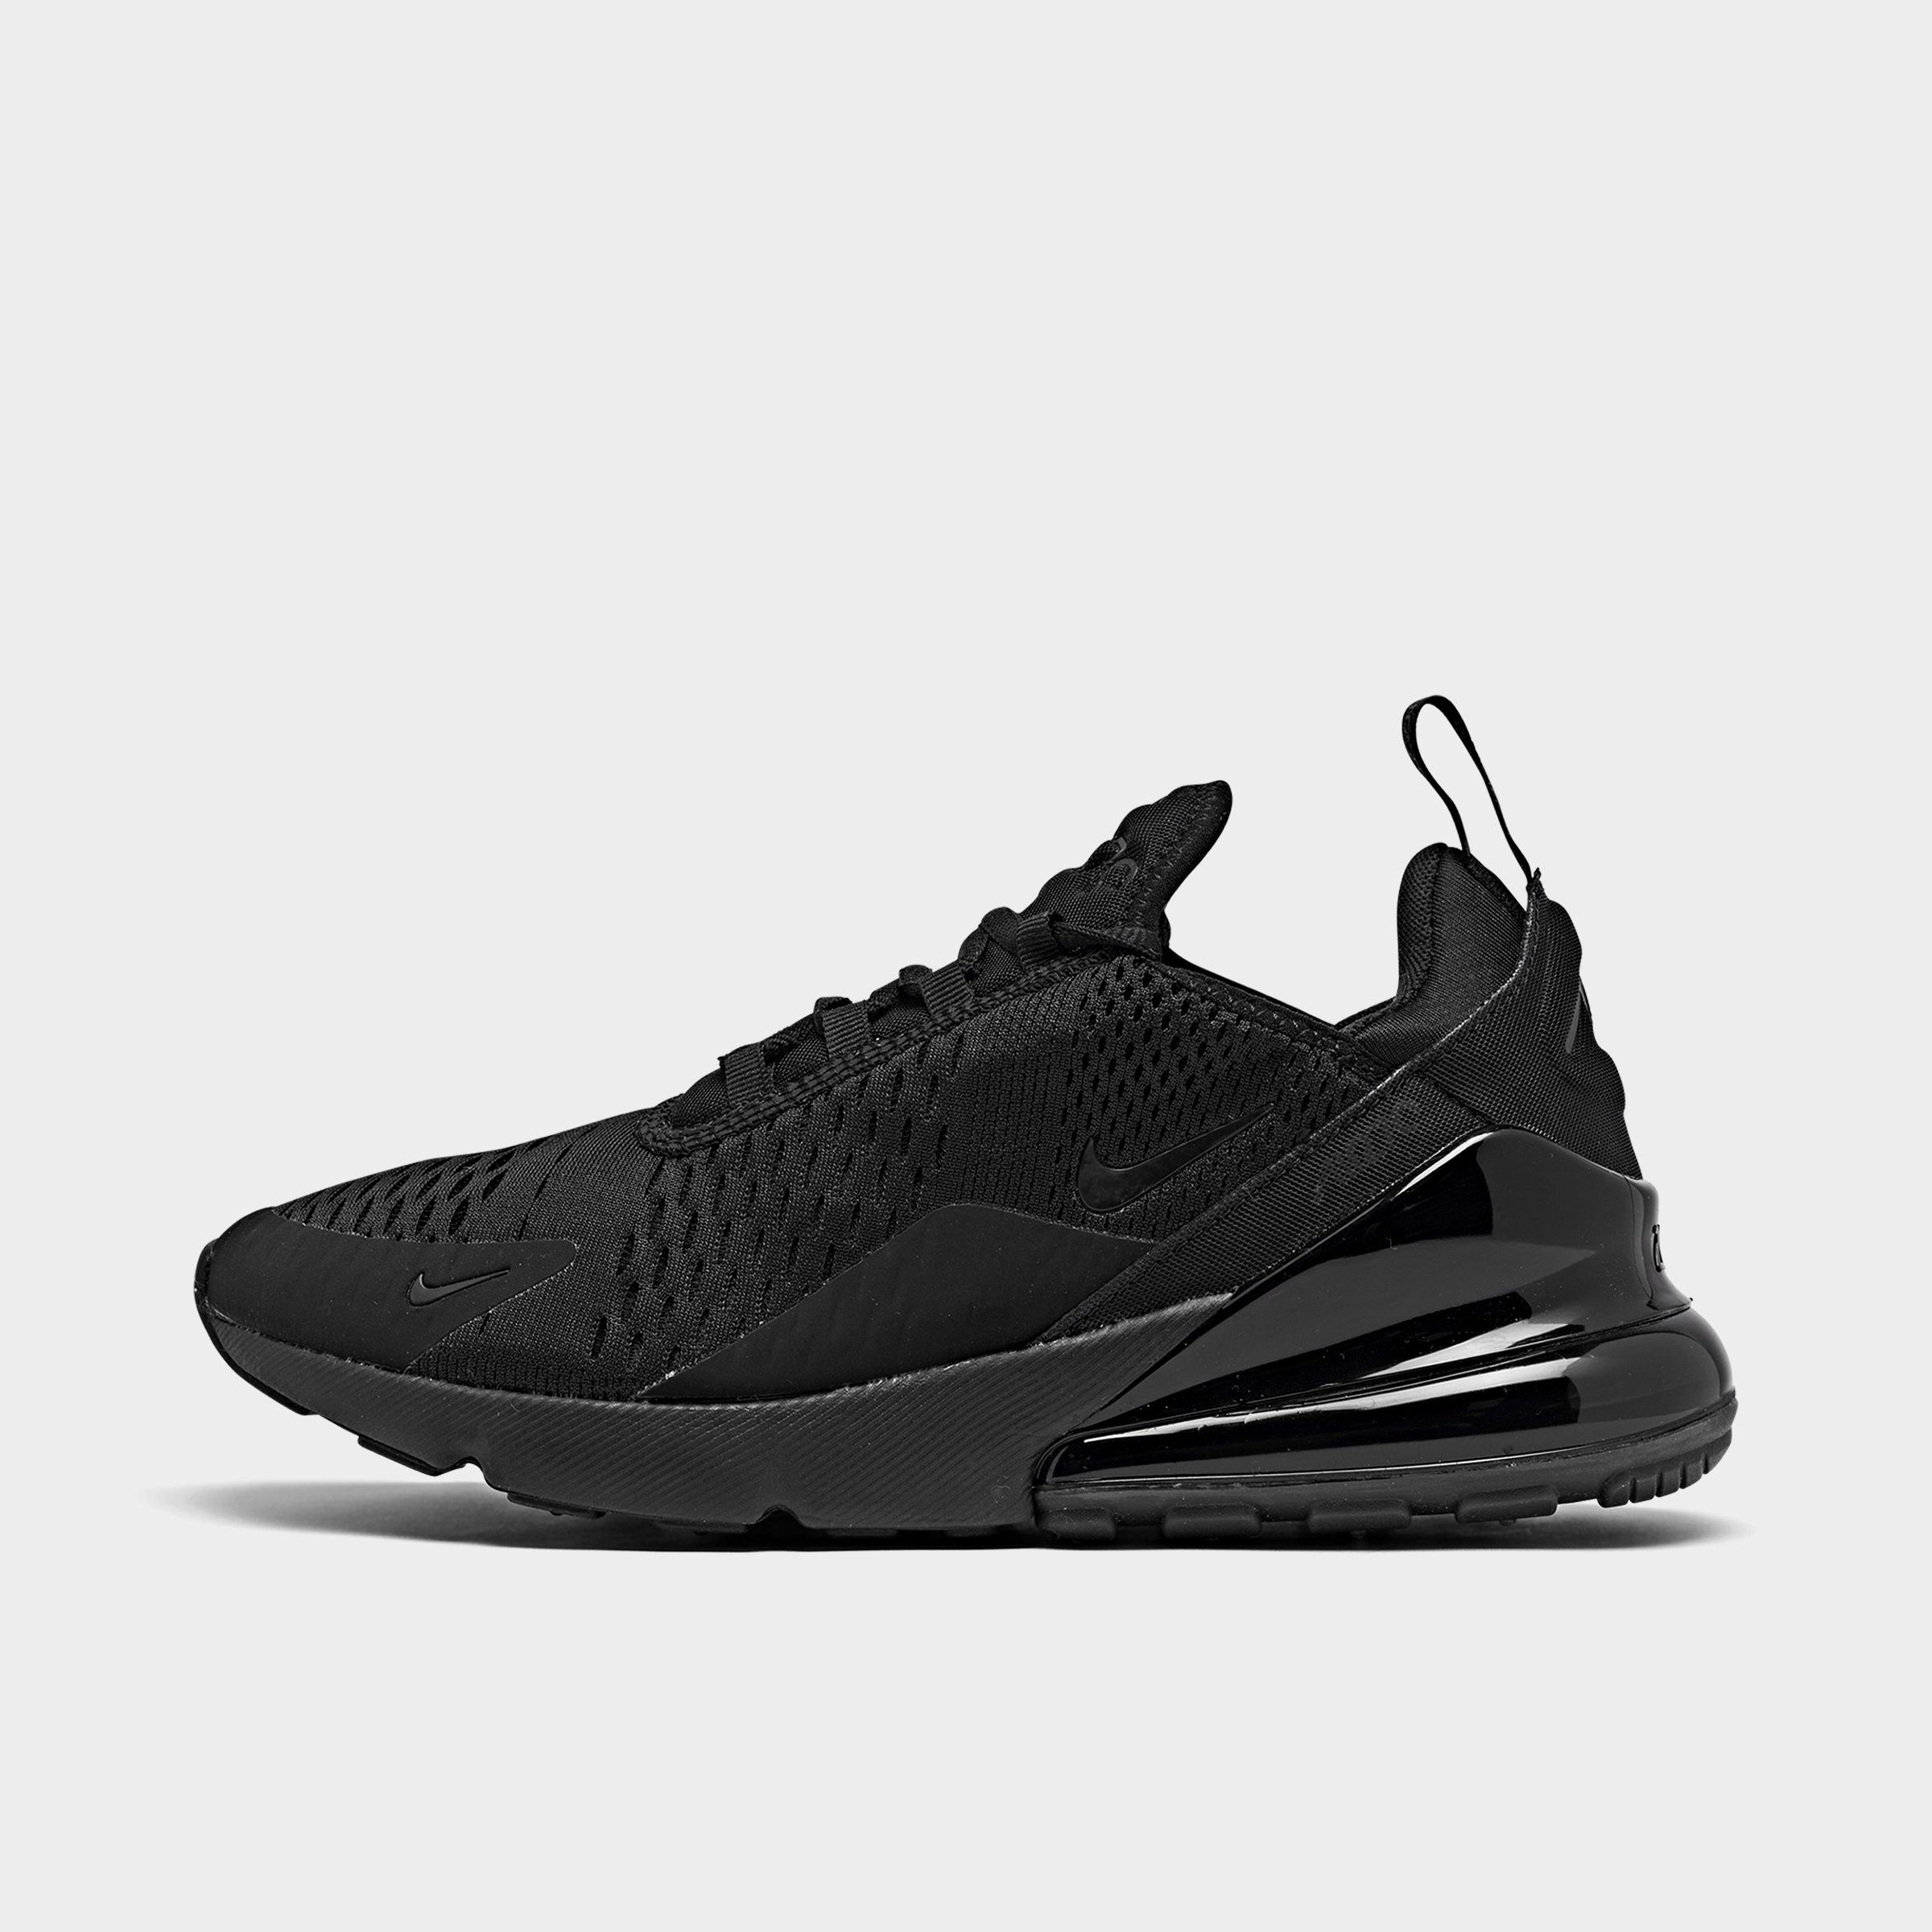 nike women's air max 270 shoes black and pink